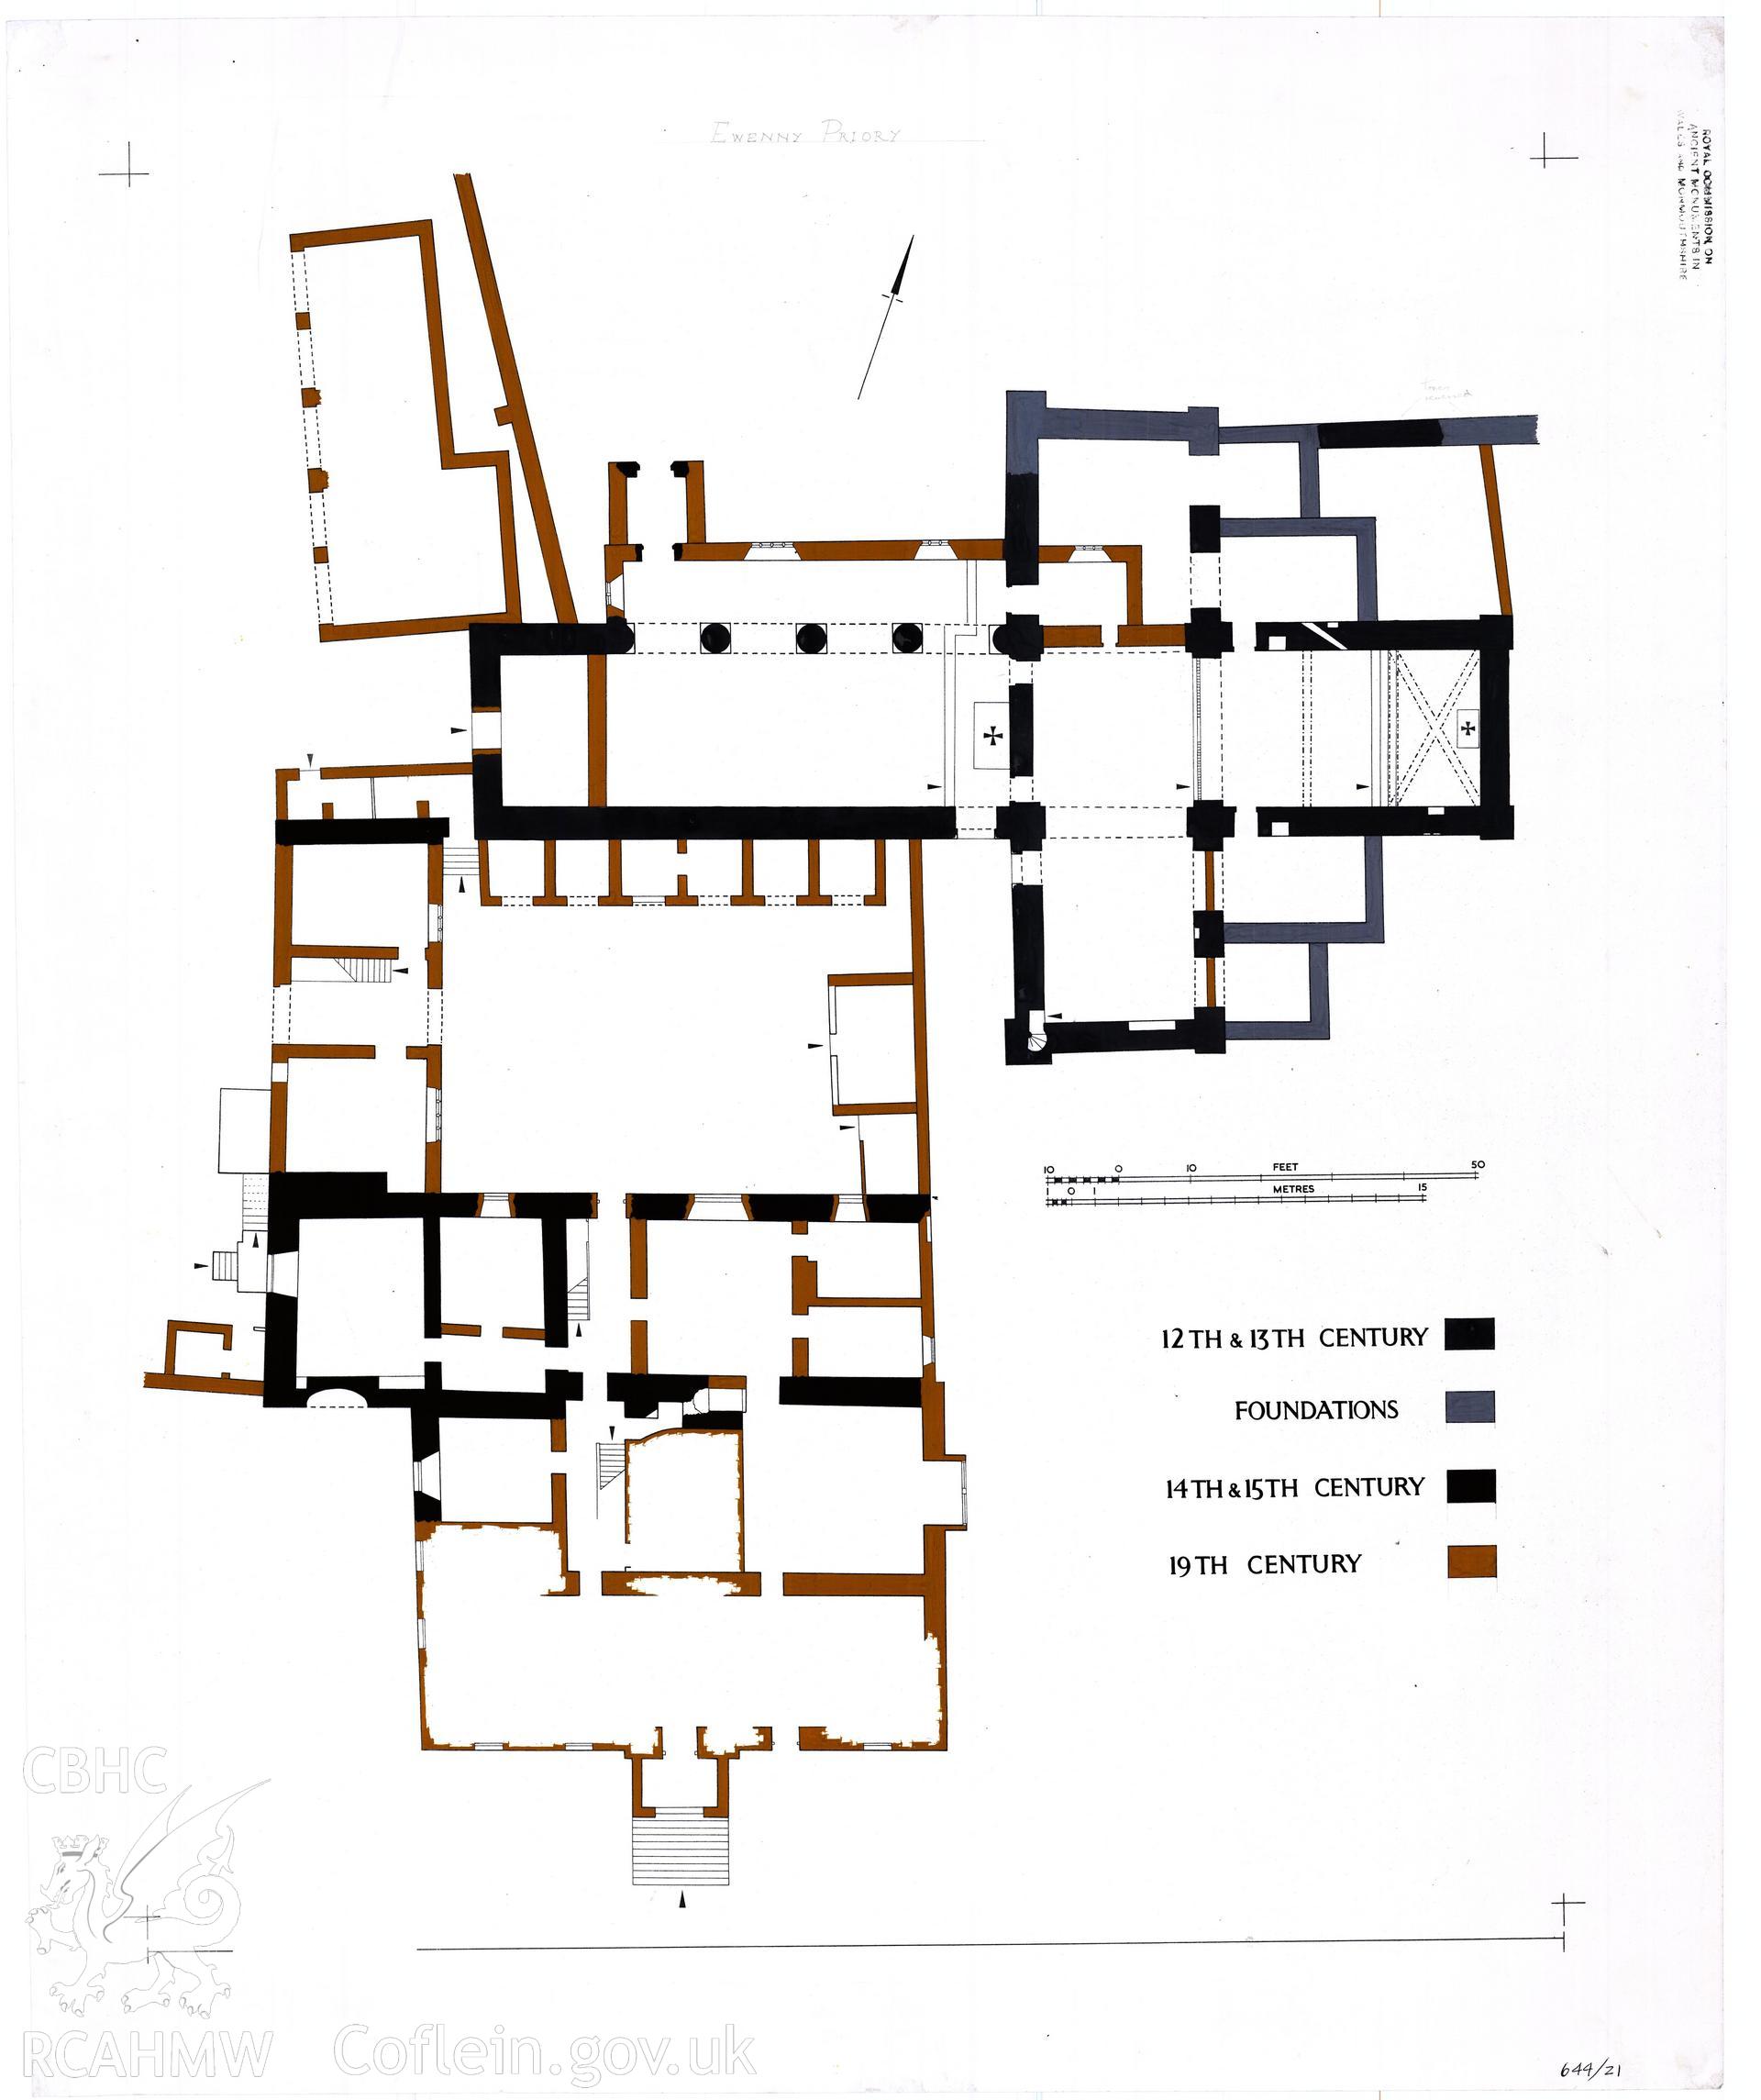 Cadw guardianship monument drawing of Ewenny Priory. Church + house, plan. Cadw Ref. No:664/21 (664?). Scale 1:100.